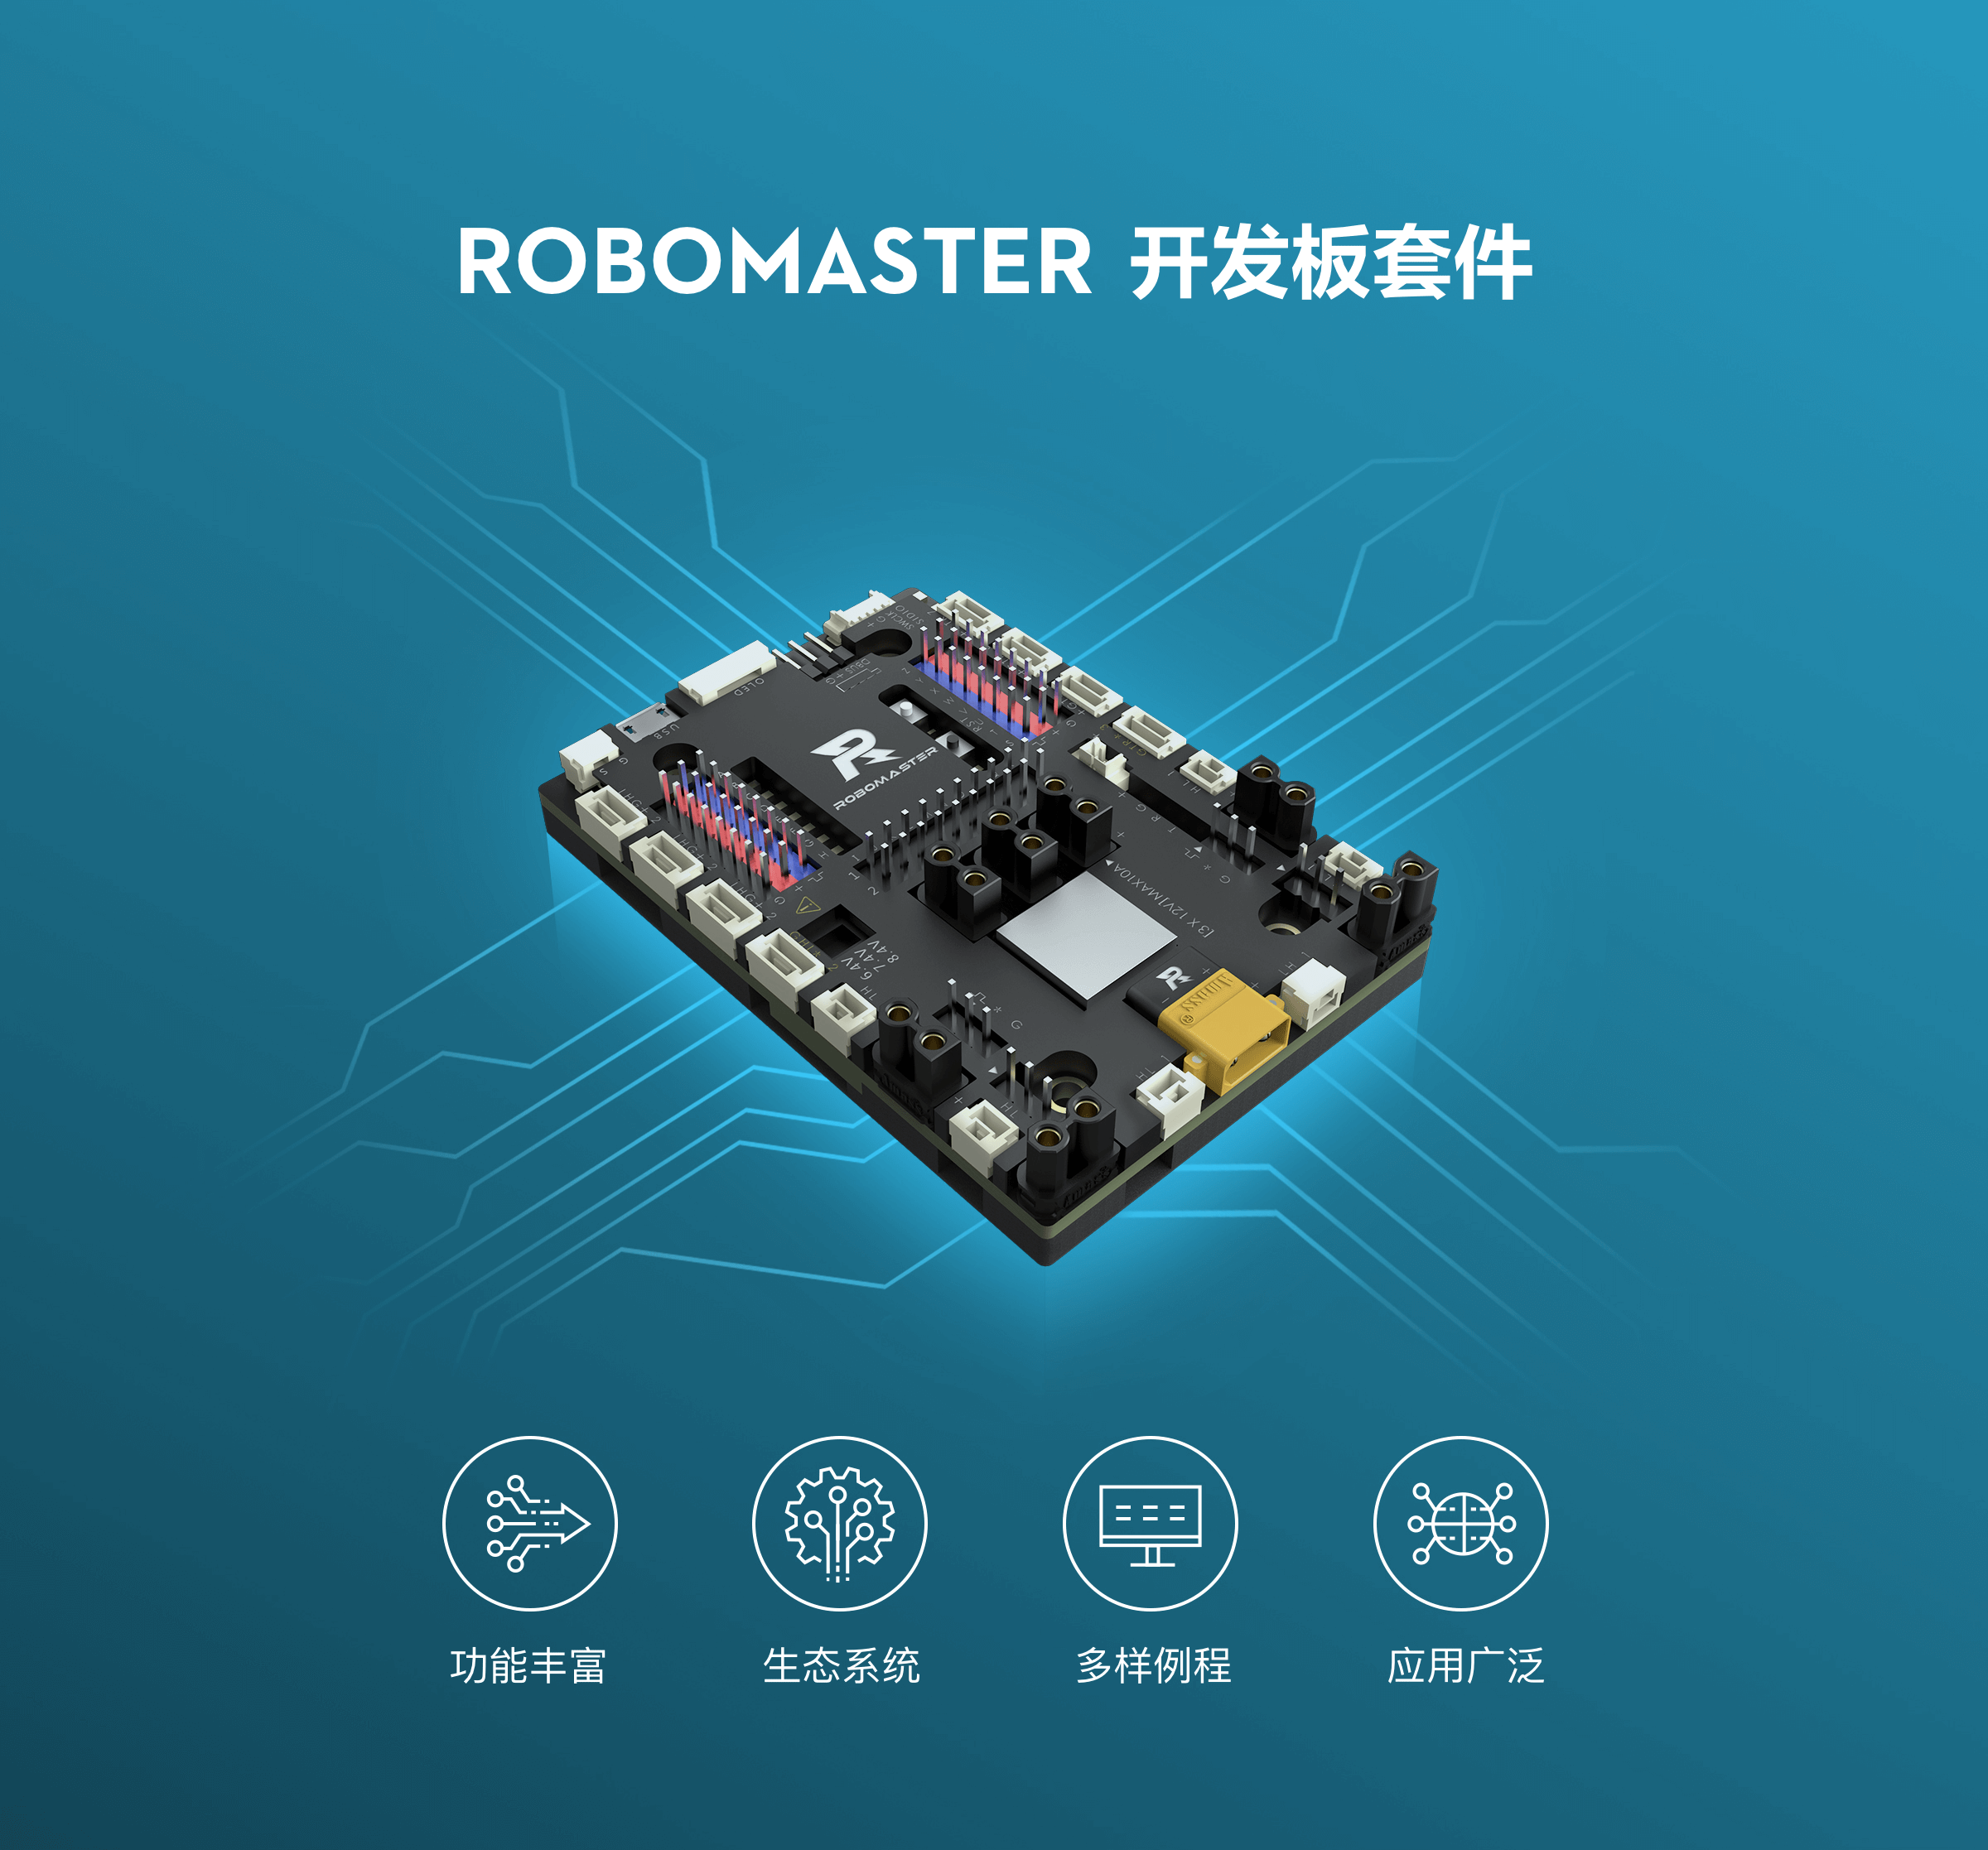 Product Picture of Development Board